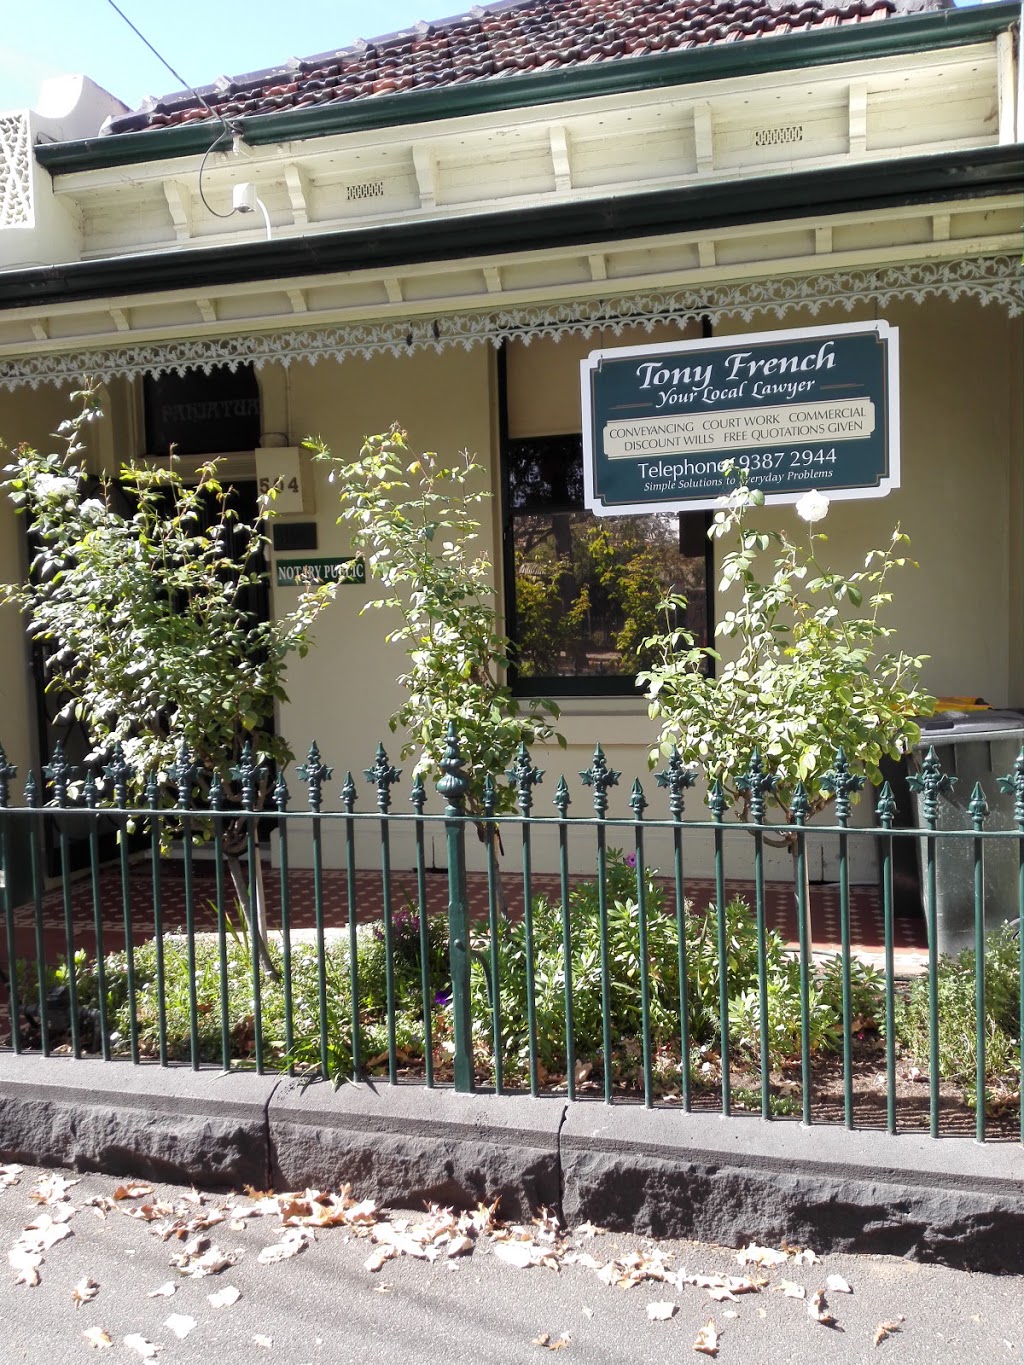 Tony French Solicitor | 504 Rathdowne St, Carlton North VIC 3054, Australia | Phone: (03) 9387 2944